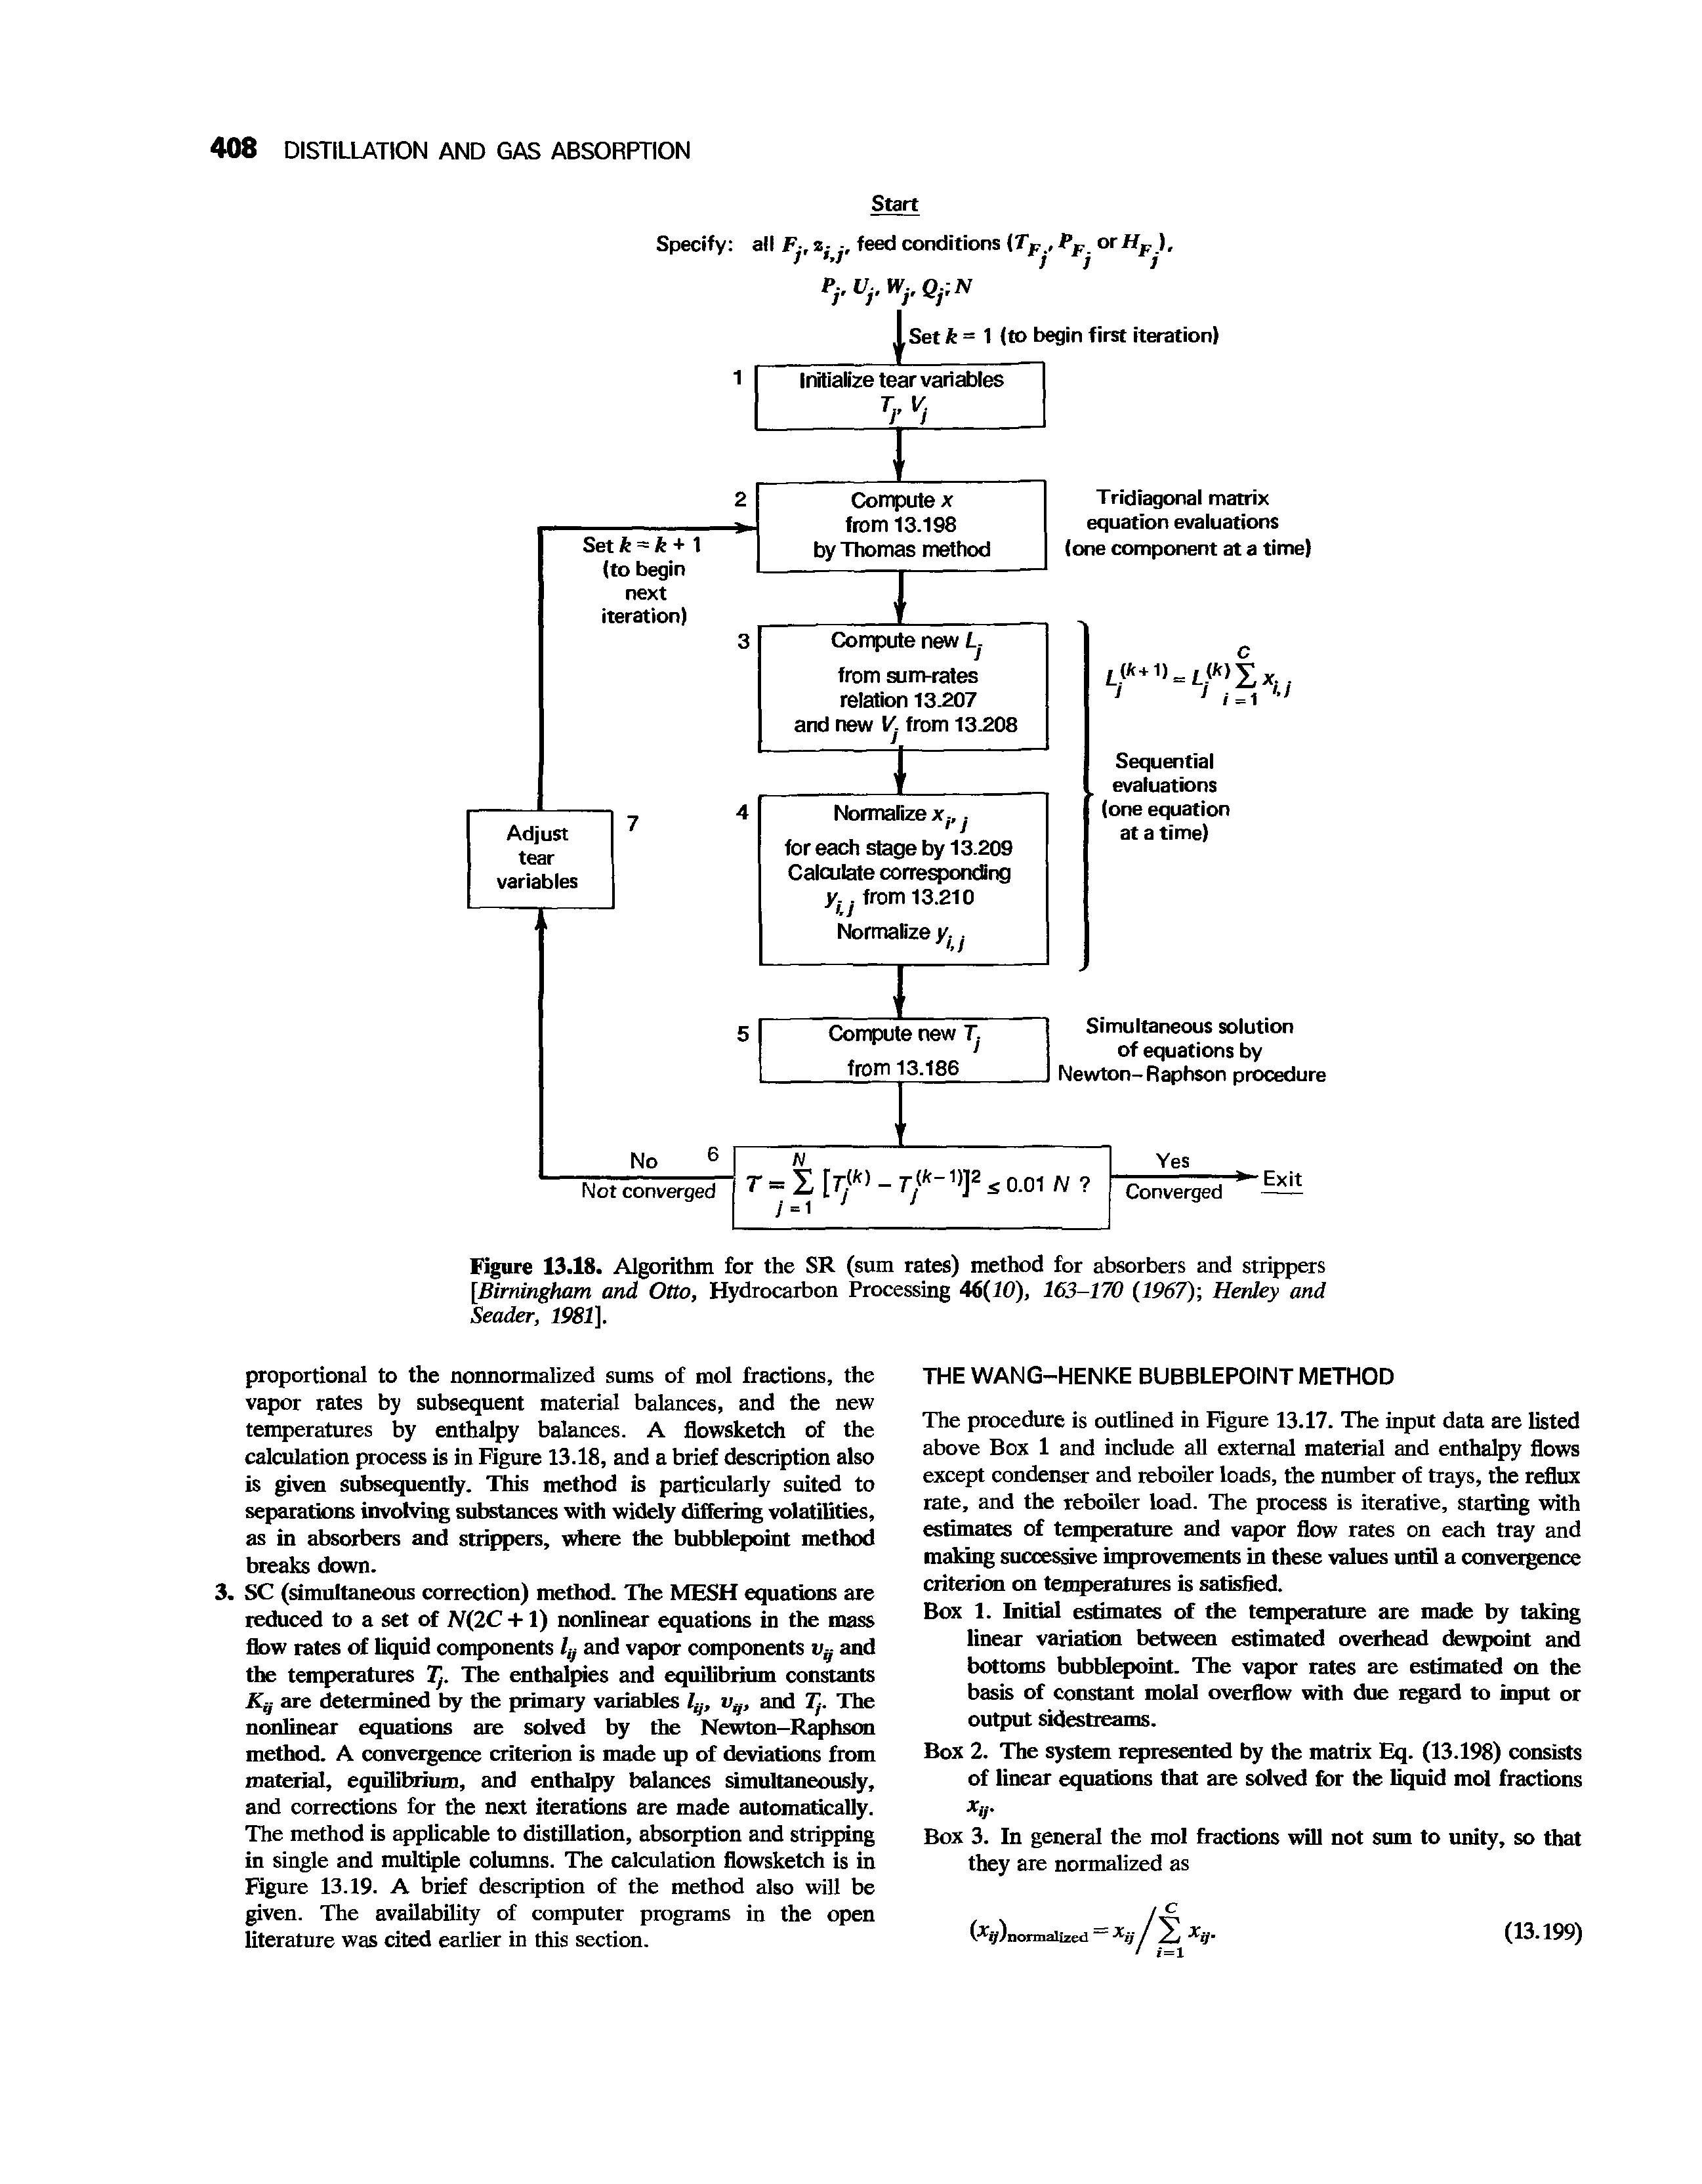 Figure 13.18. Algorithm for the SR (sum rates) method for absorbers and strippers [Birningkam and Otto, Hydrocarbon Processing 46(10), 163-170 (1967) Henley and Seader, 1981].